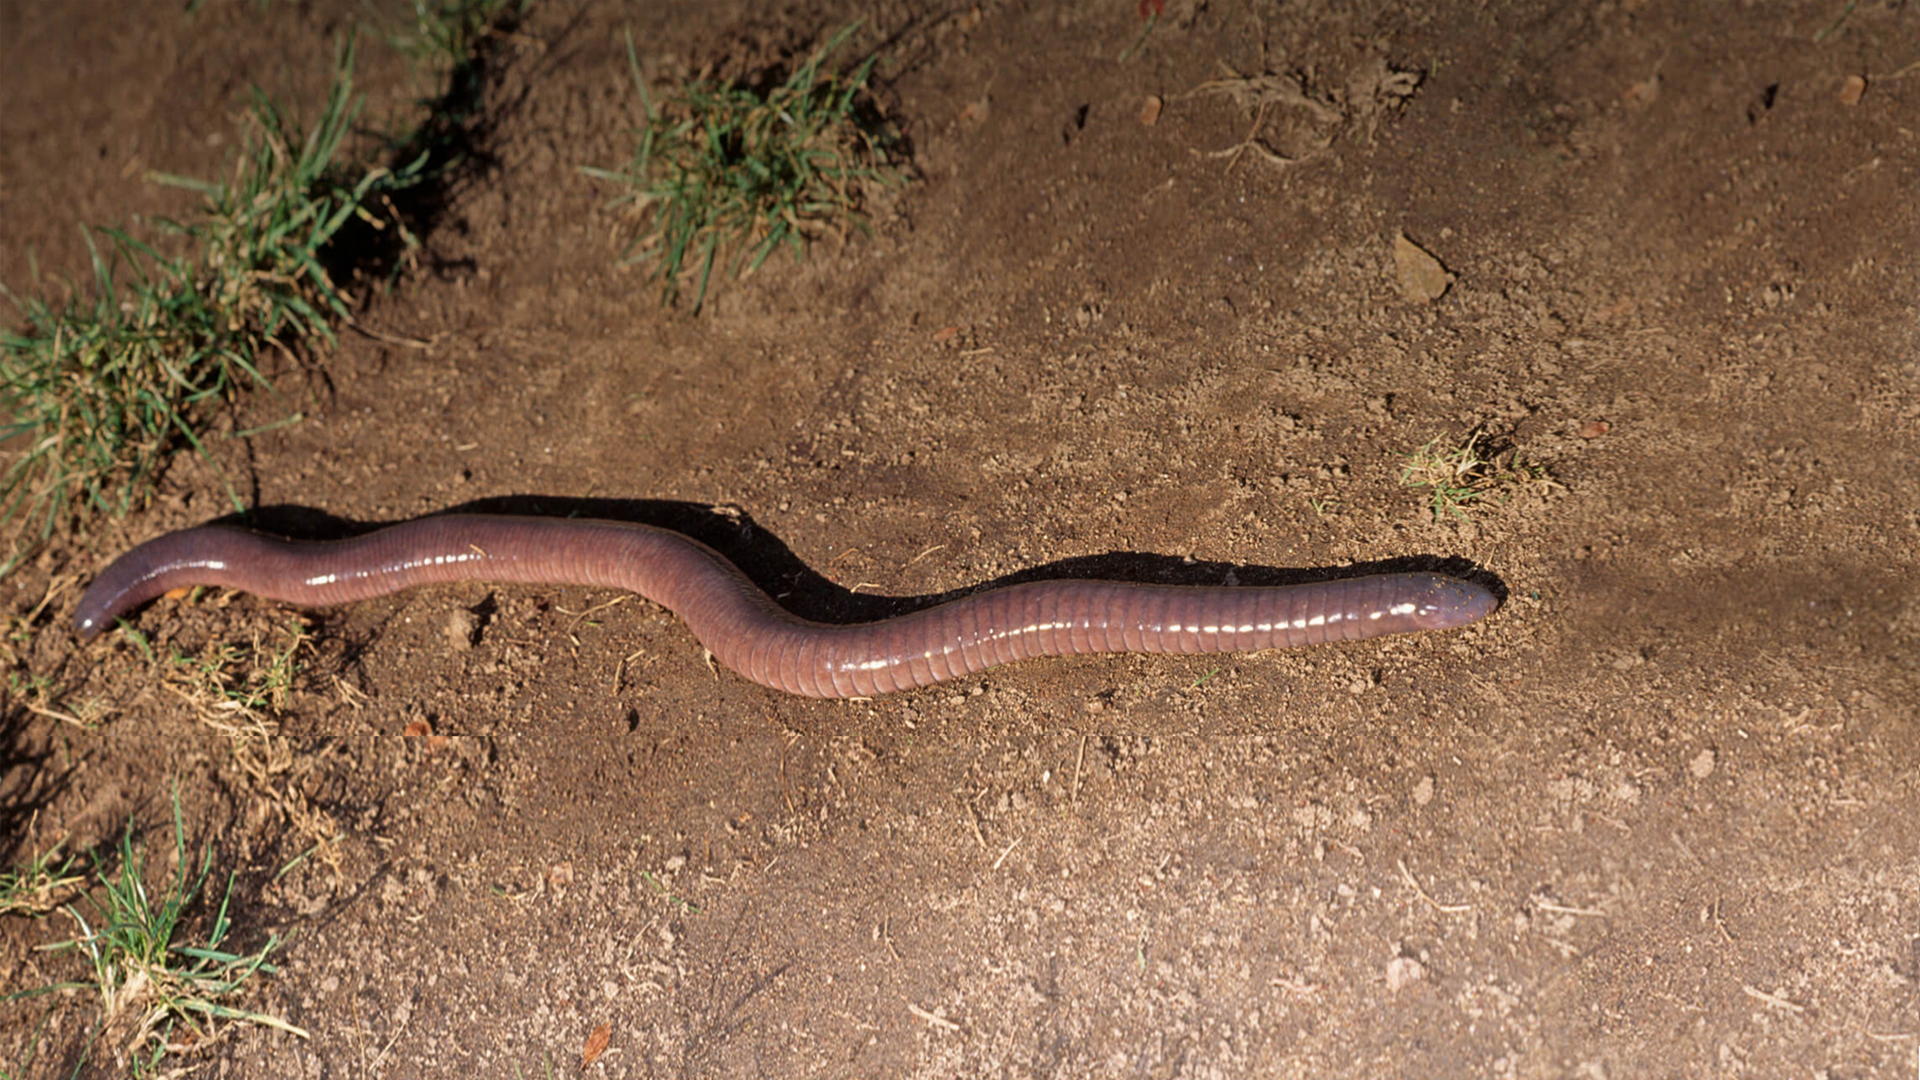  Caecilian slithering along dirt ground